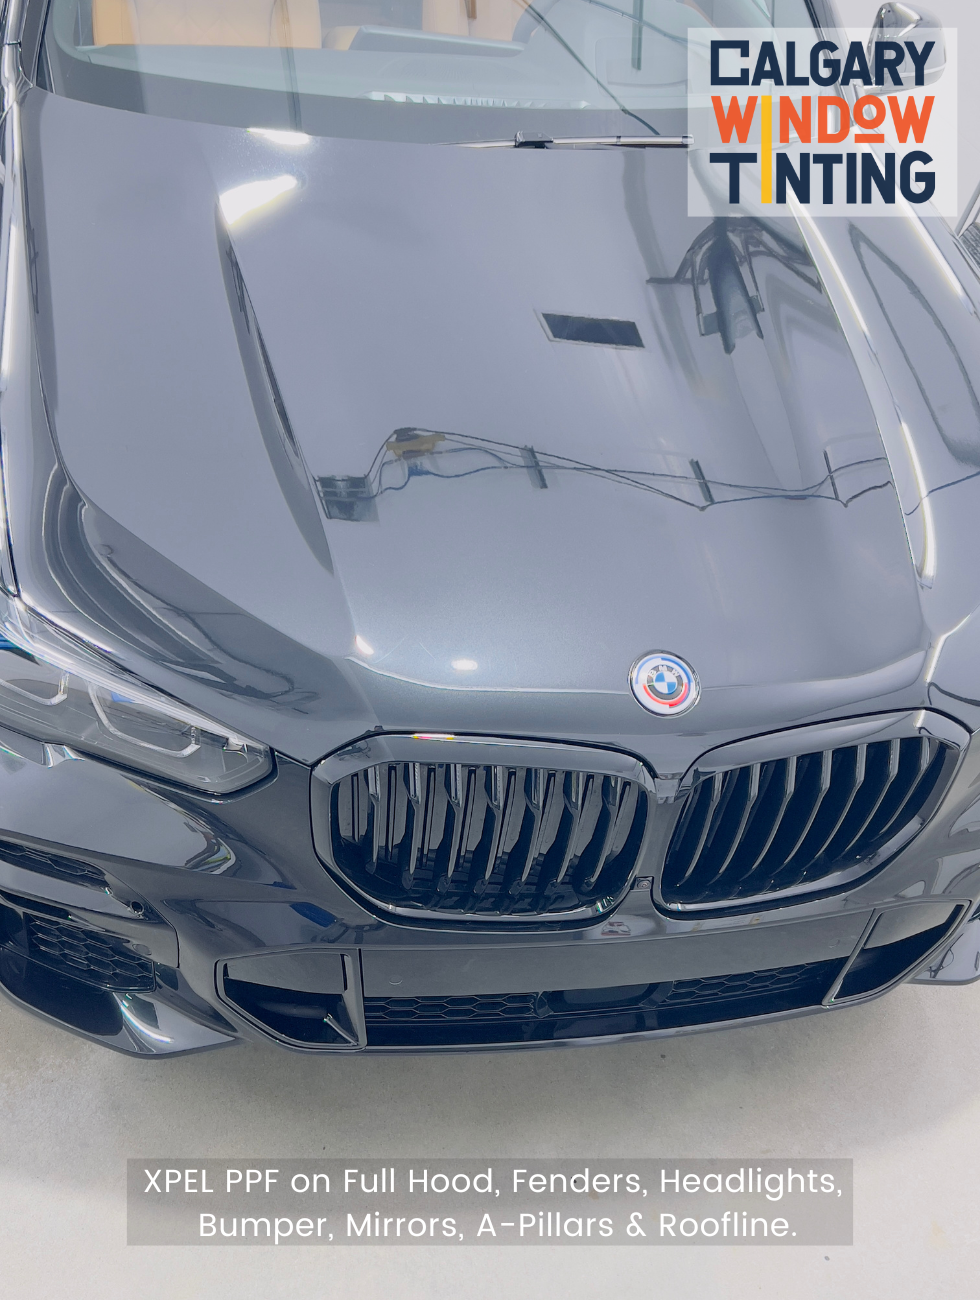 Paint protection film installed on BMW X3.